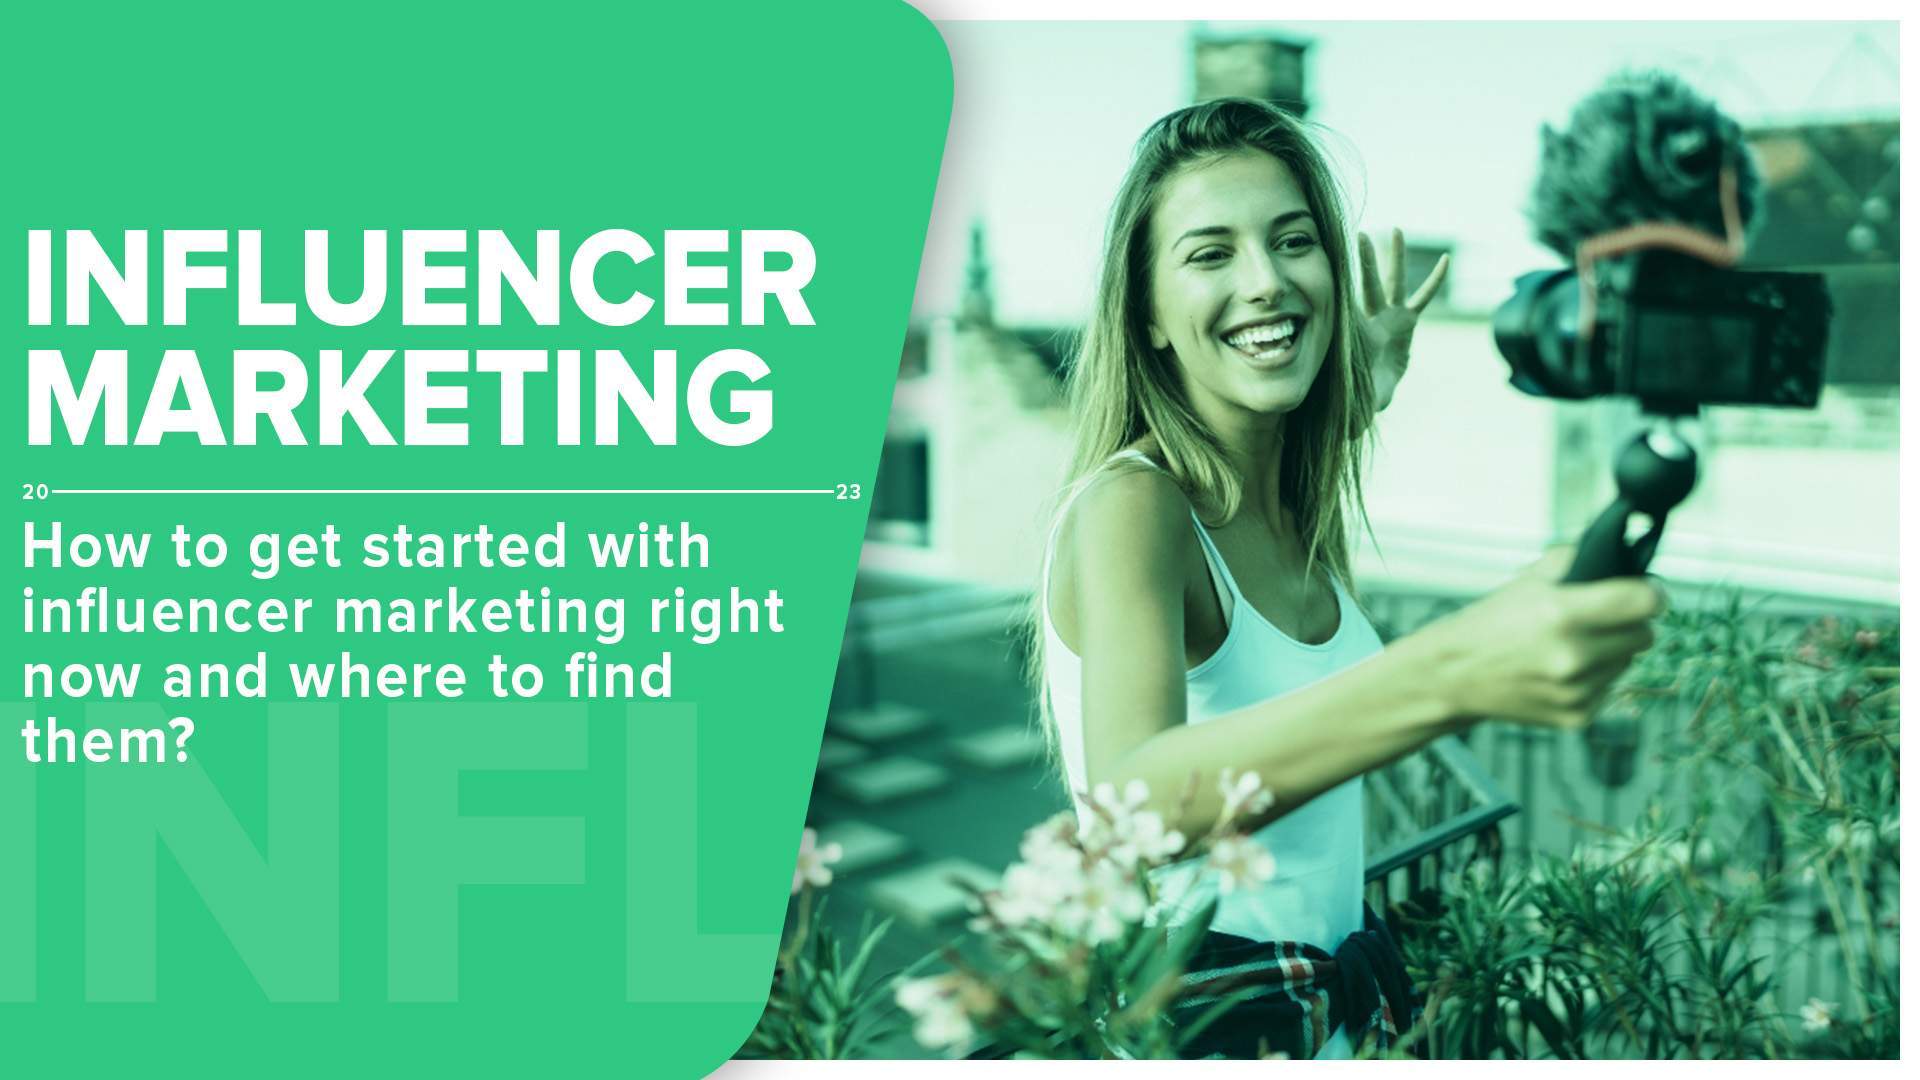 How to get started with influencer marketing for e-Commerce right now digital marketing blog cover image